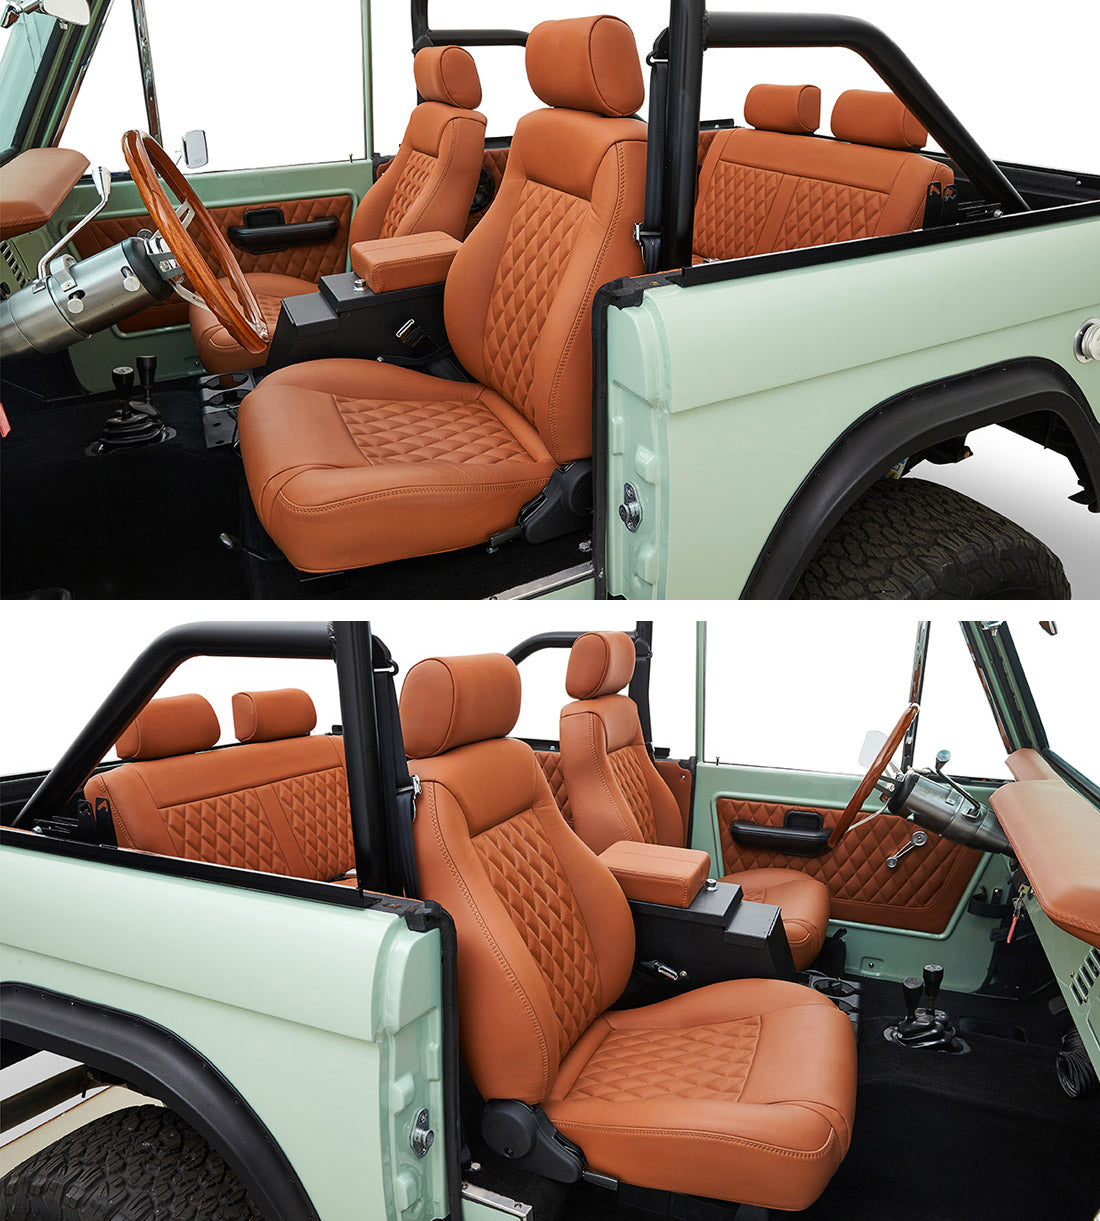 Classic_Ford_Bronco_Relicate_BMW_Cinnamon_Leather interior bucket seats